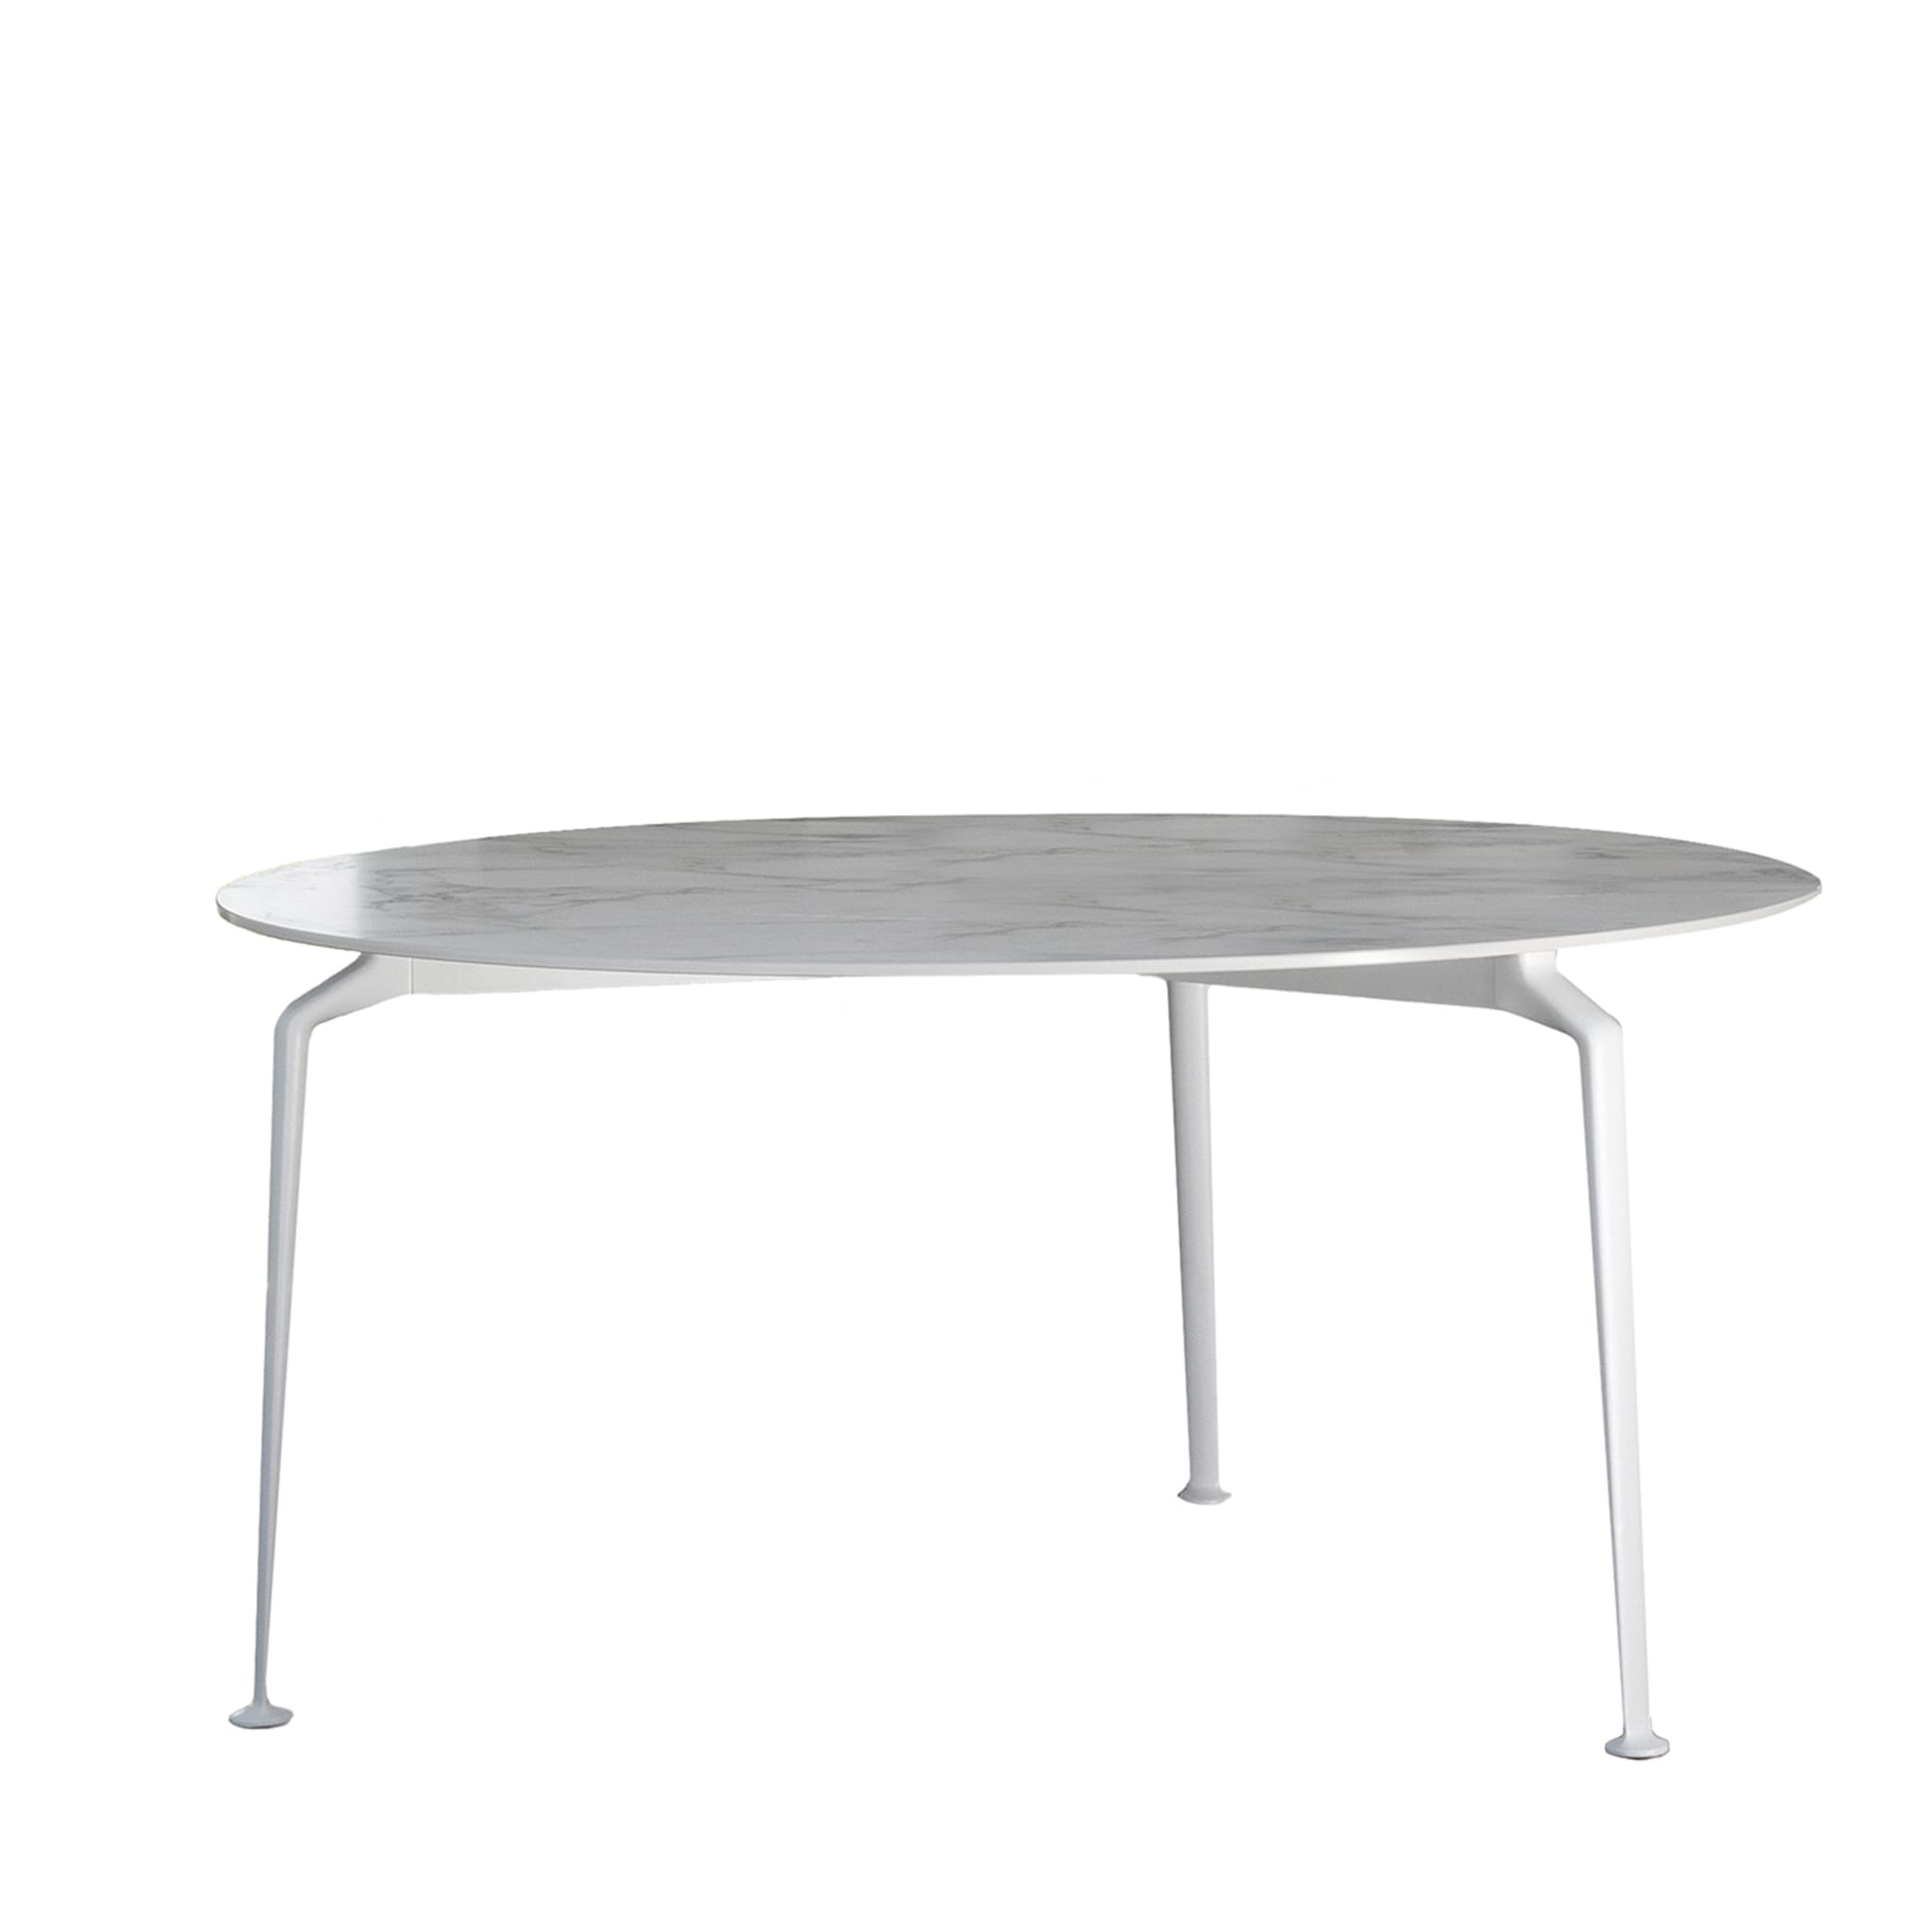 Cruise Alu White Dining Table by Ludovica & Roberto Palomba - Main view